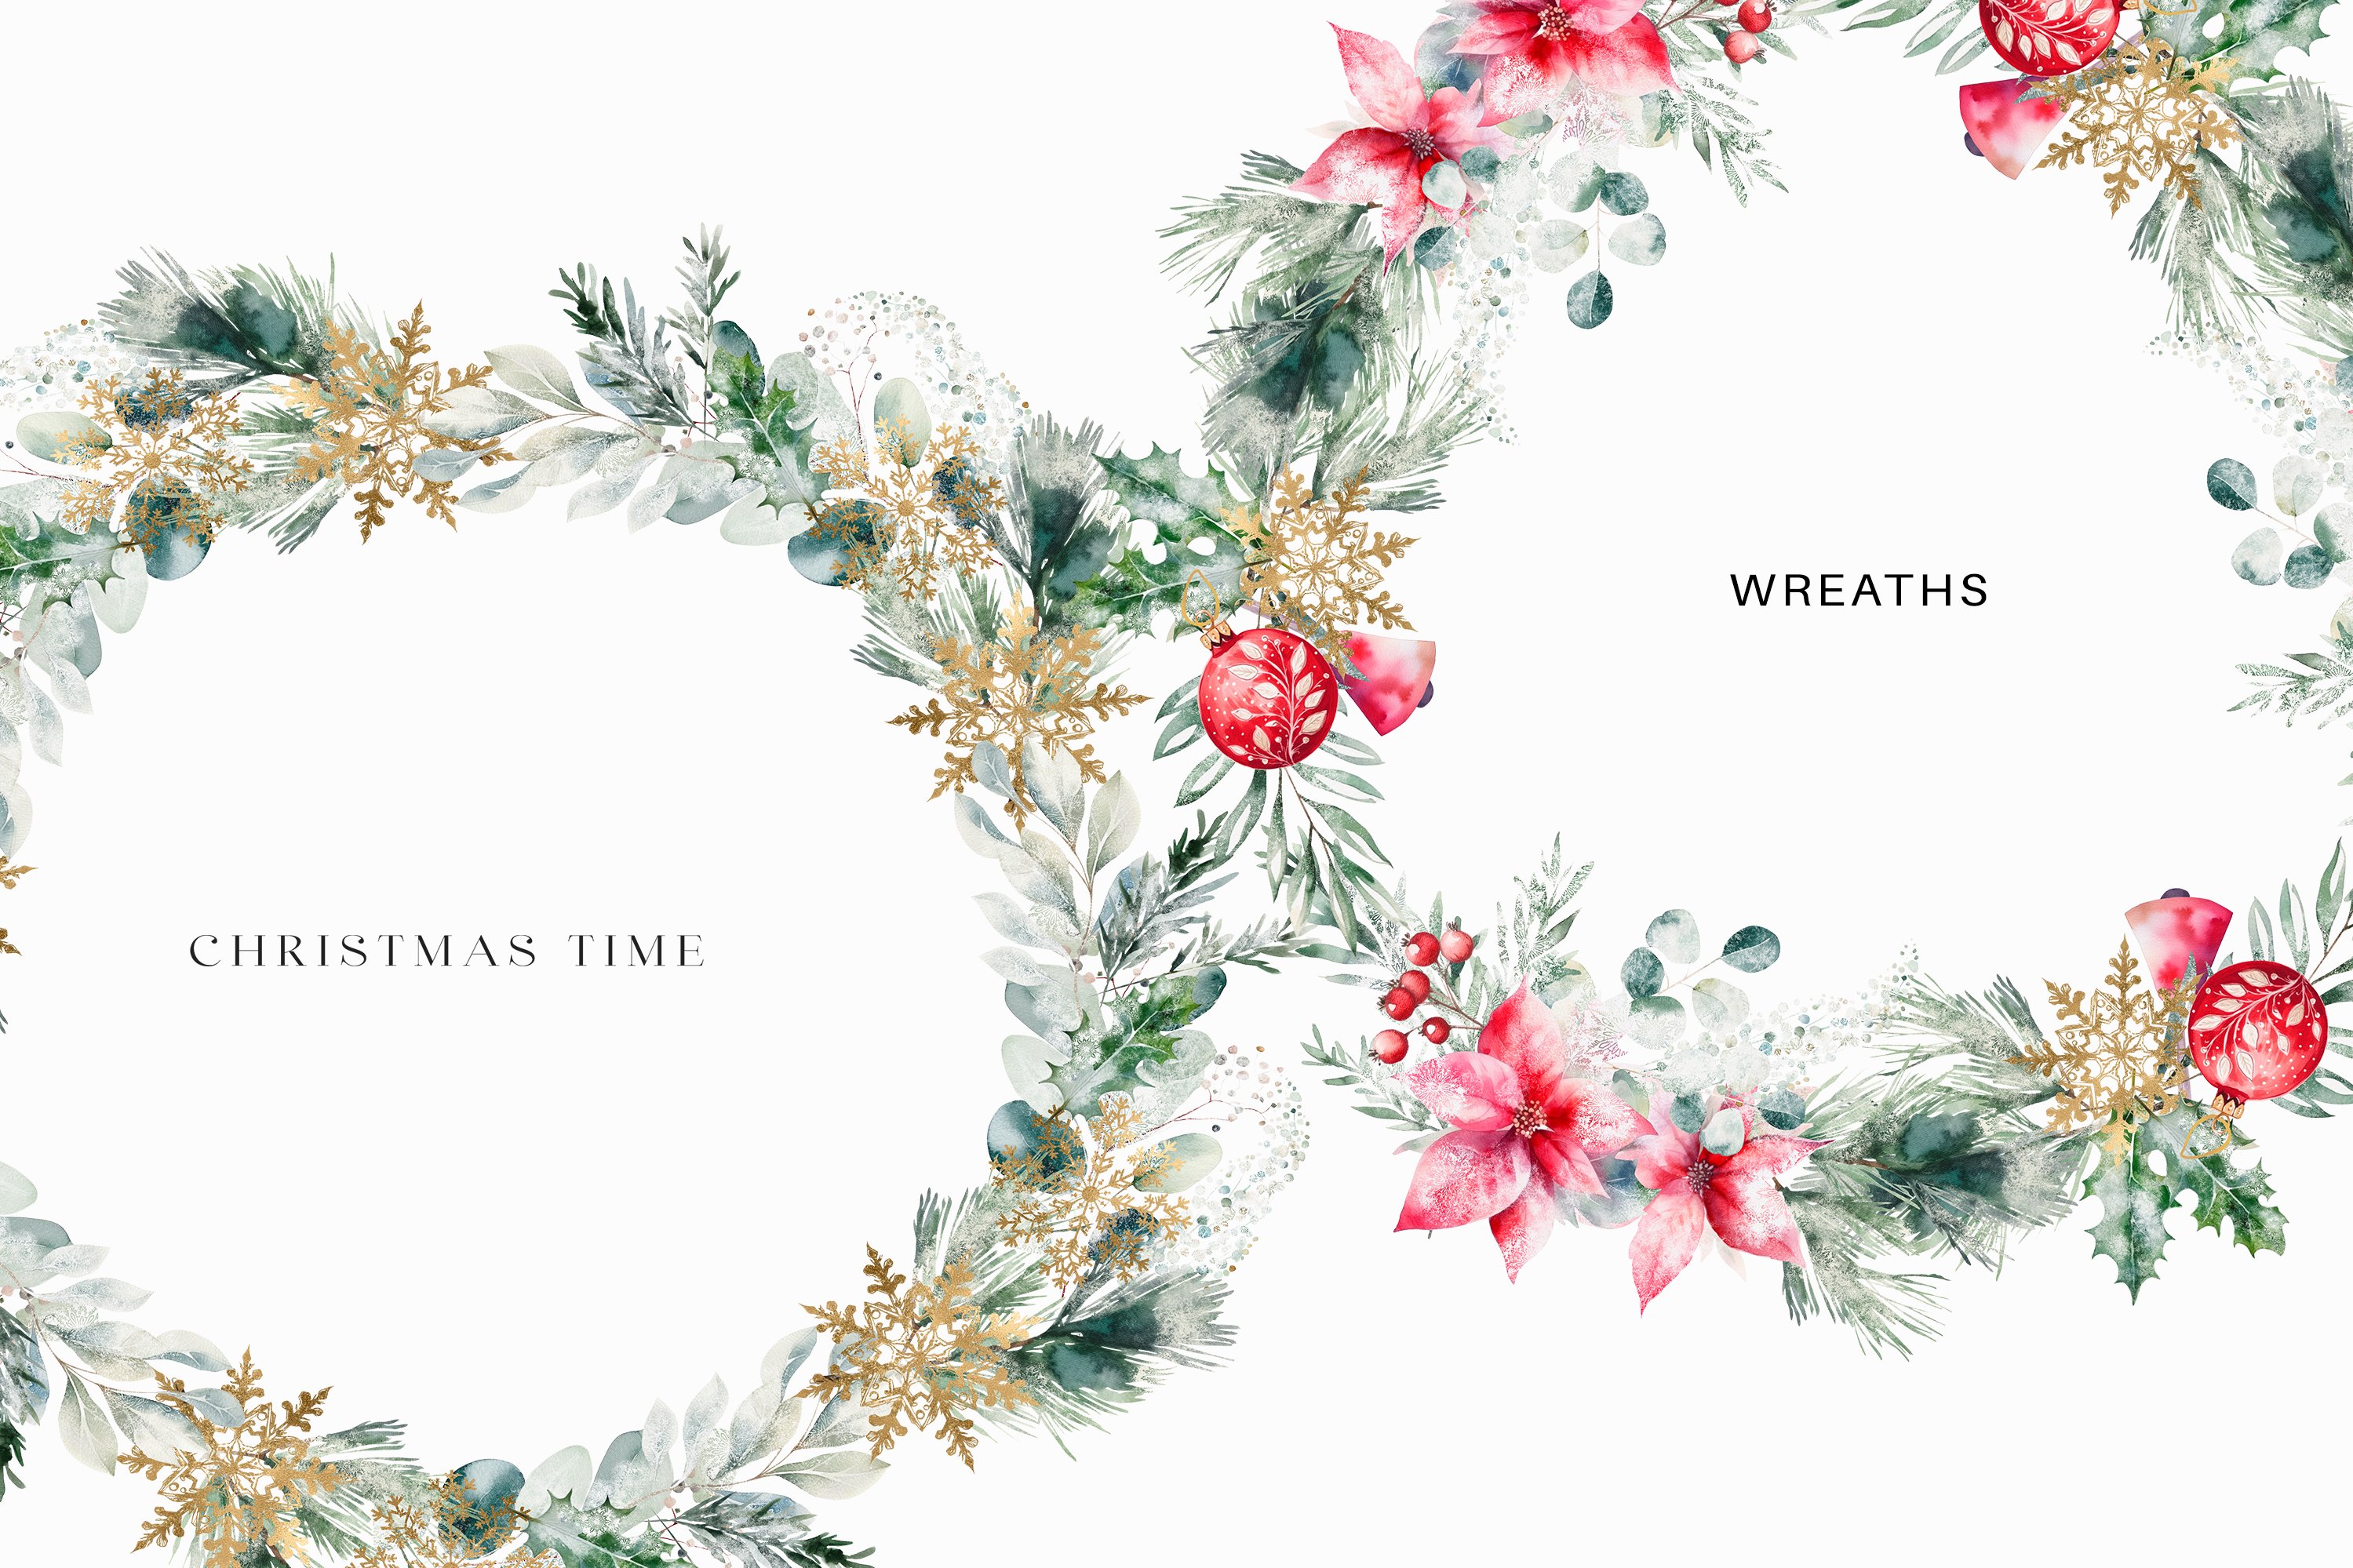 Cute Christmas Watercolor Collection - Design Cuts